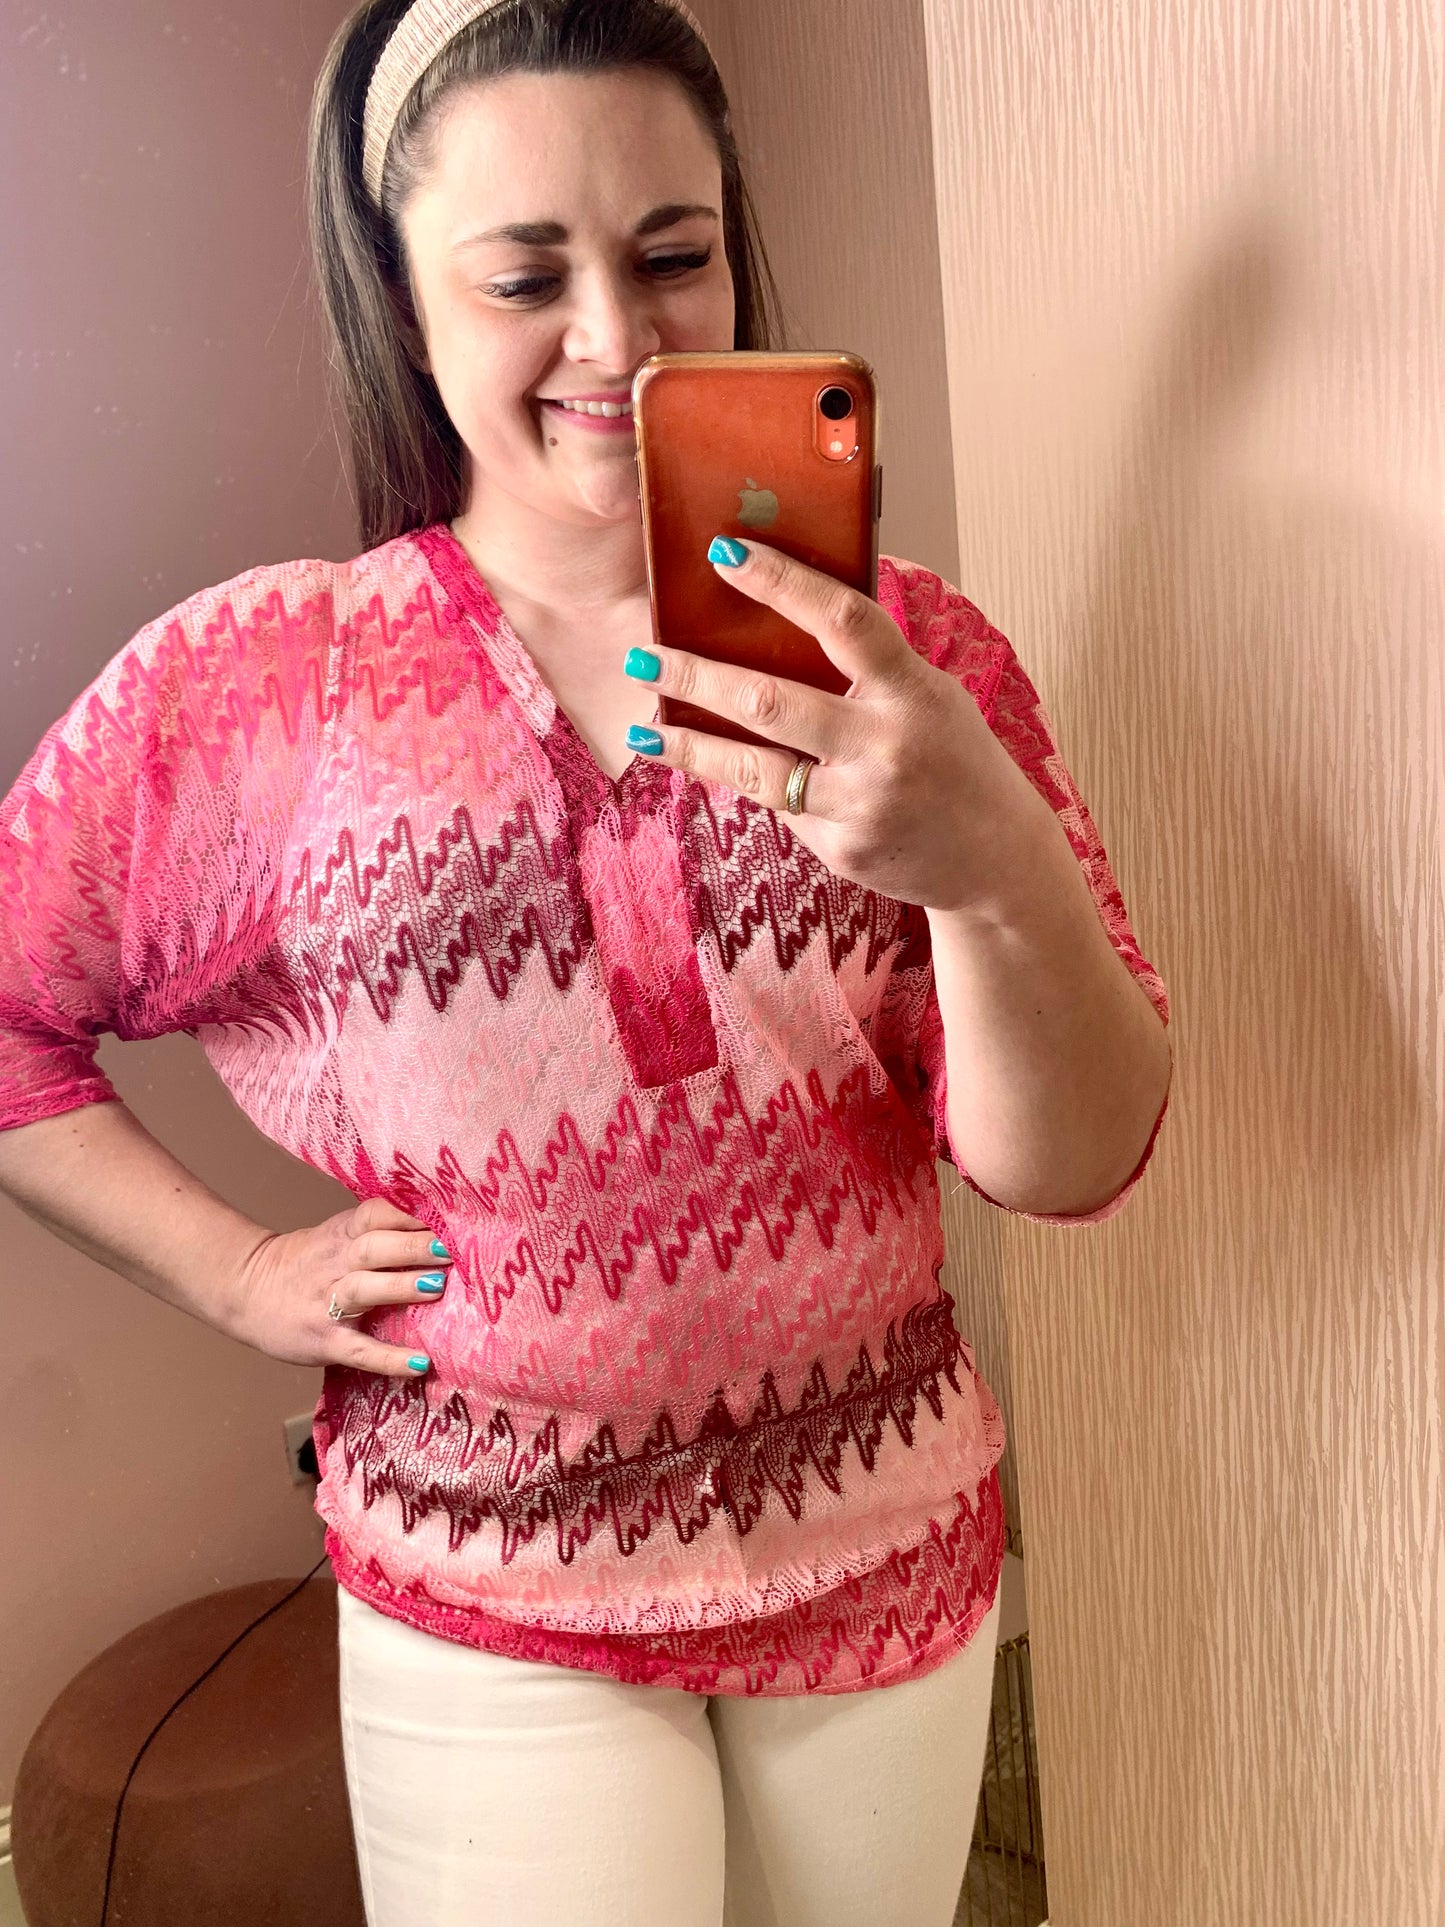 Young brunette female stood in front of a pink wall and taking a photo of herself on her phone in the mirror.  She is wearing white skinny trousers and a crochet knit v-neck top.  It has three quarter length sleeves and is a zig zag knit with differing shades of pink.  Her free hand is on her hip.  She is wearing a pink headband and smiling.